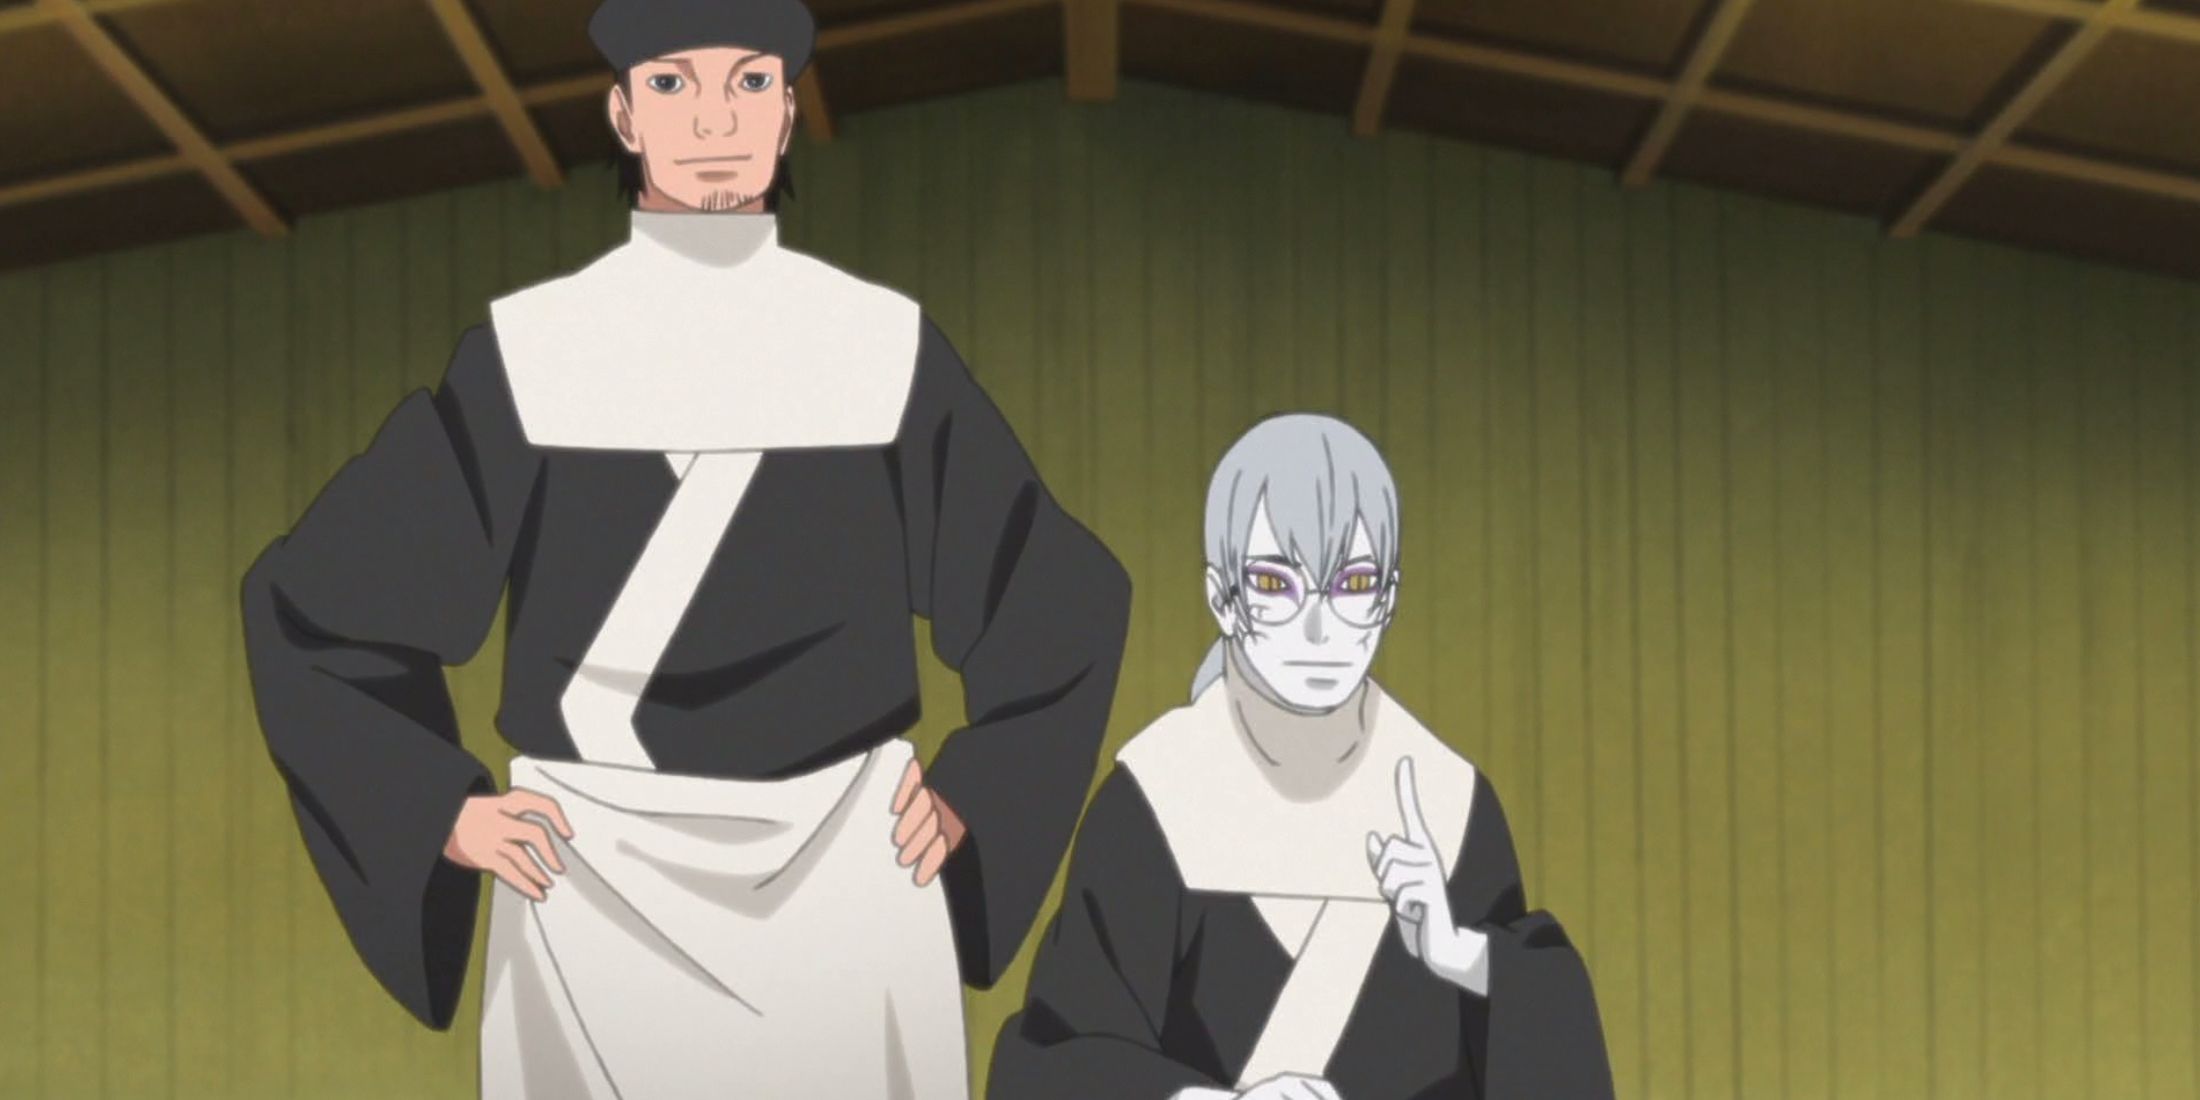 Kabuto sits while another character stands next to him in Boruto